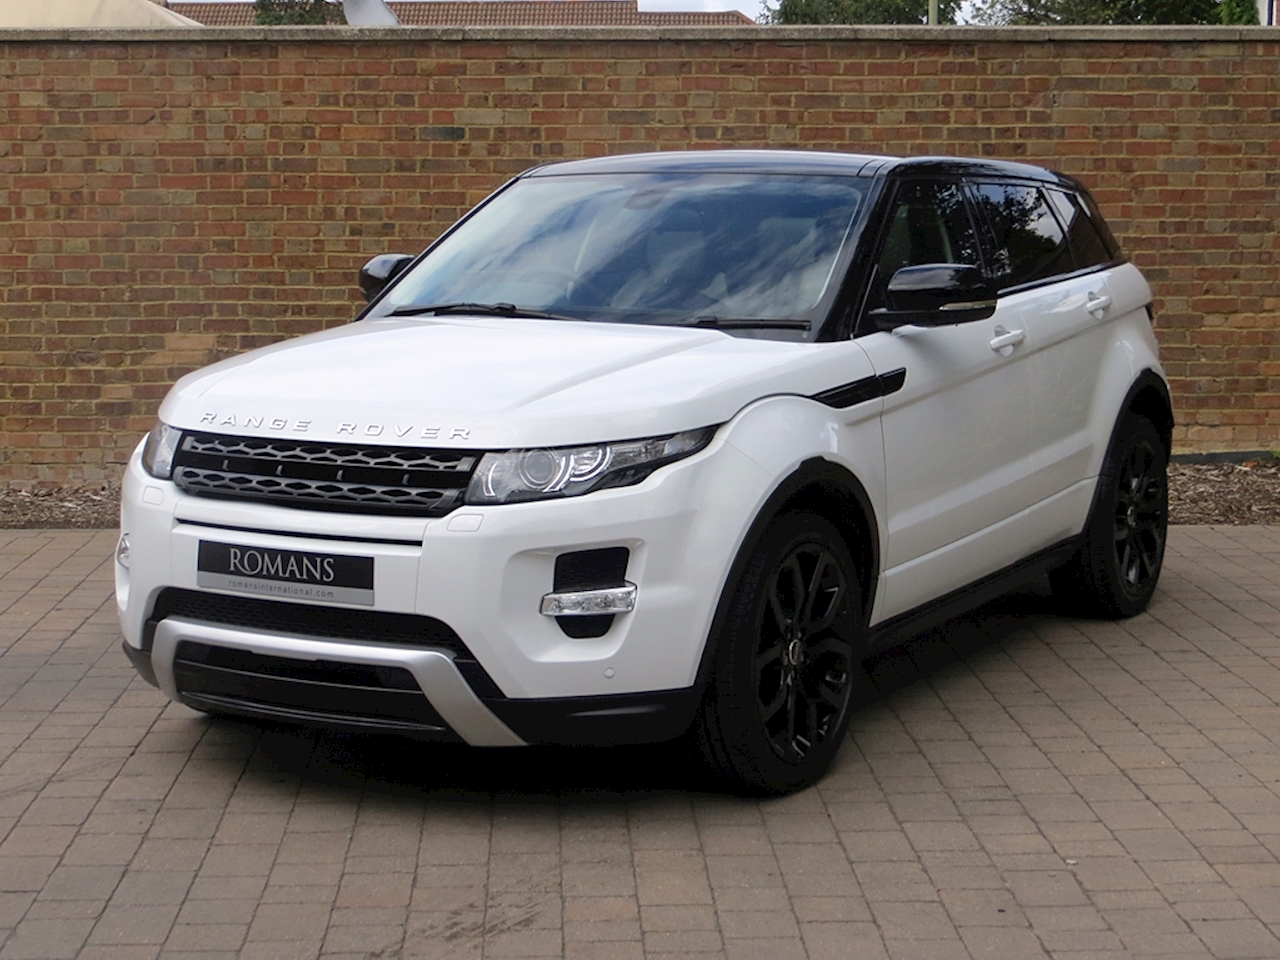 2012 Used Land Rover Range Rover Evoque 2.2 SD4 Dynamic